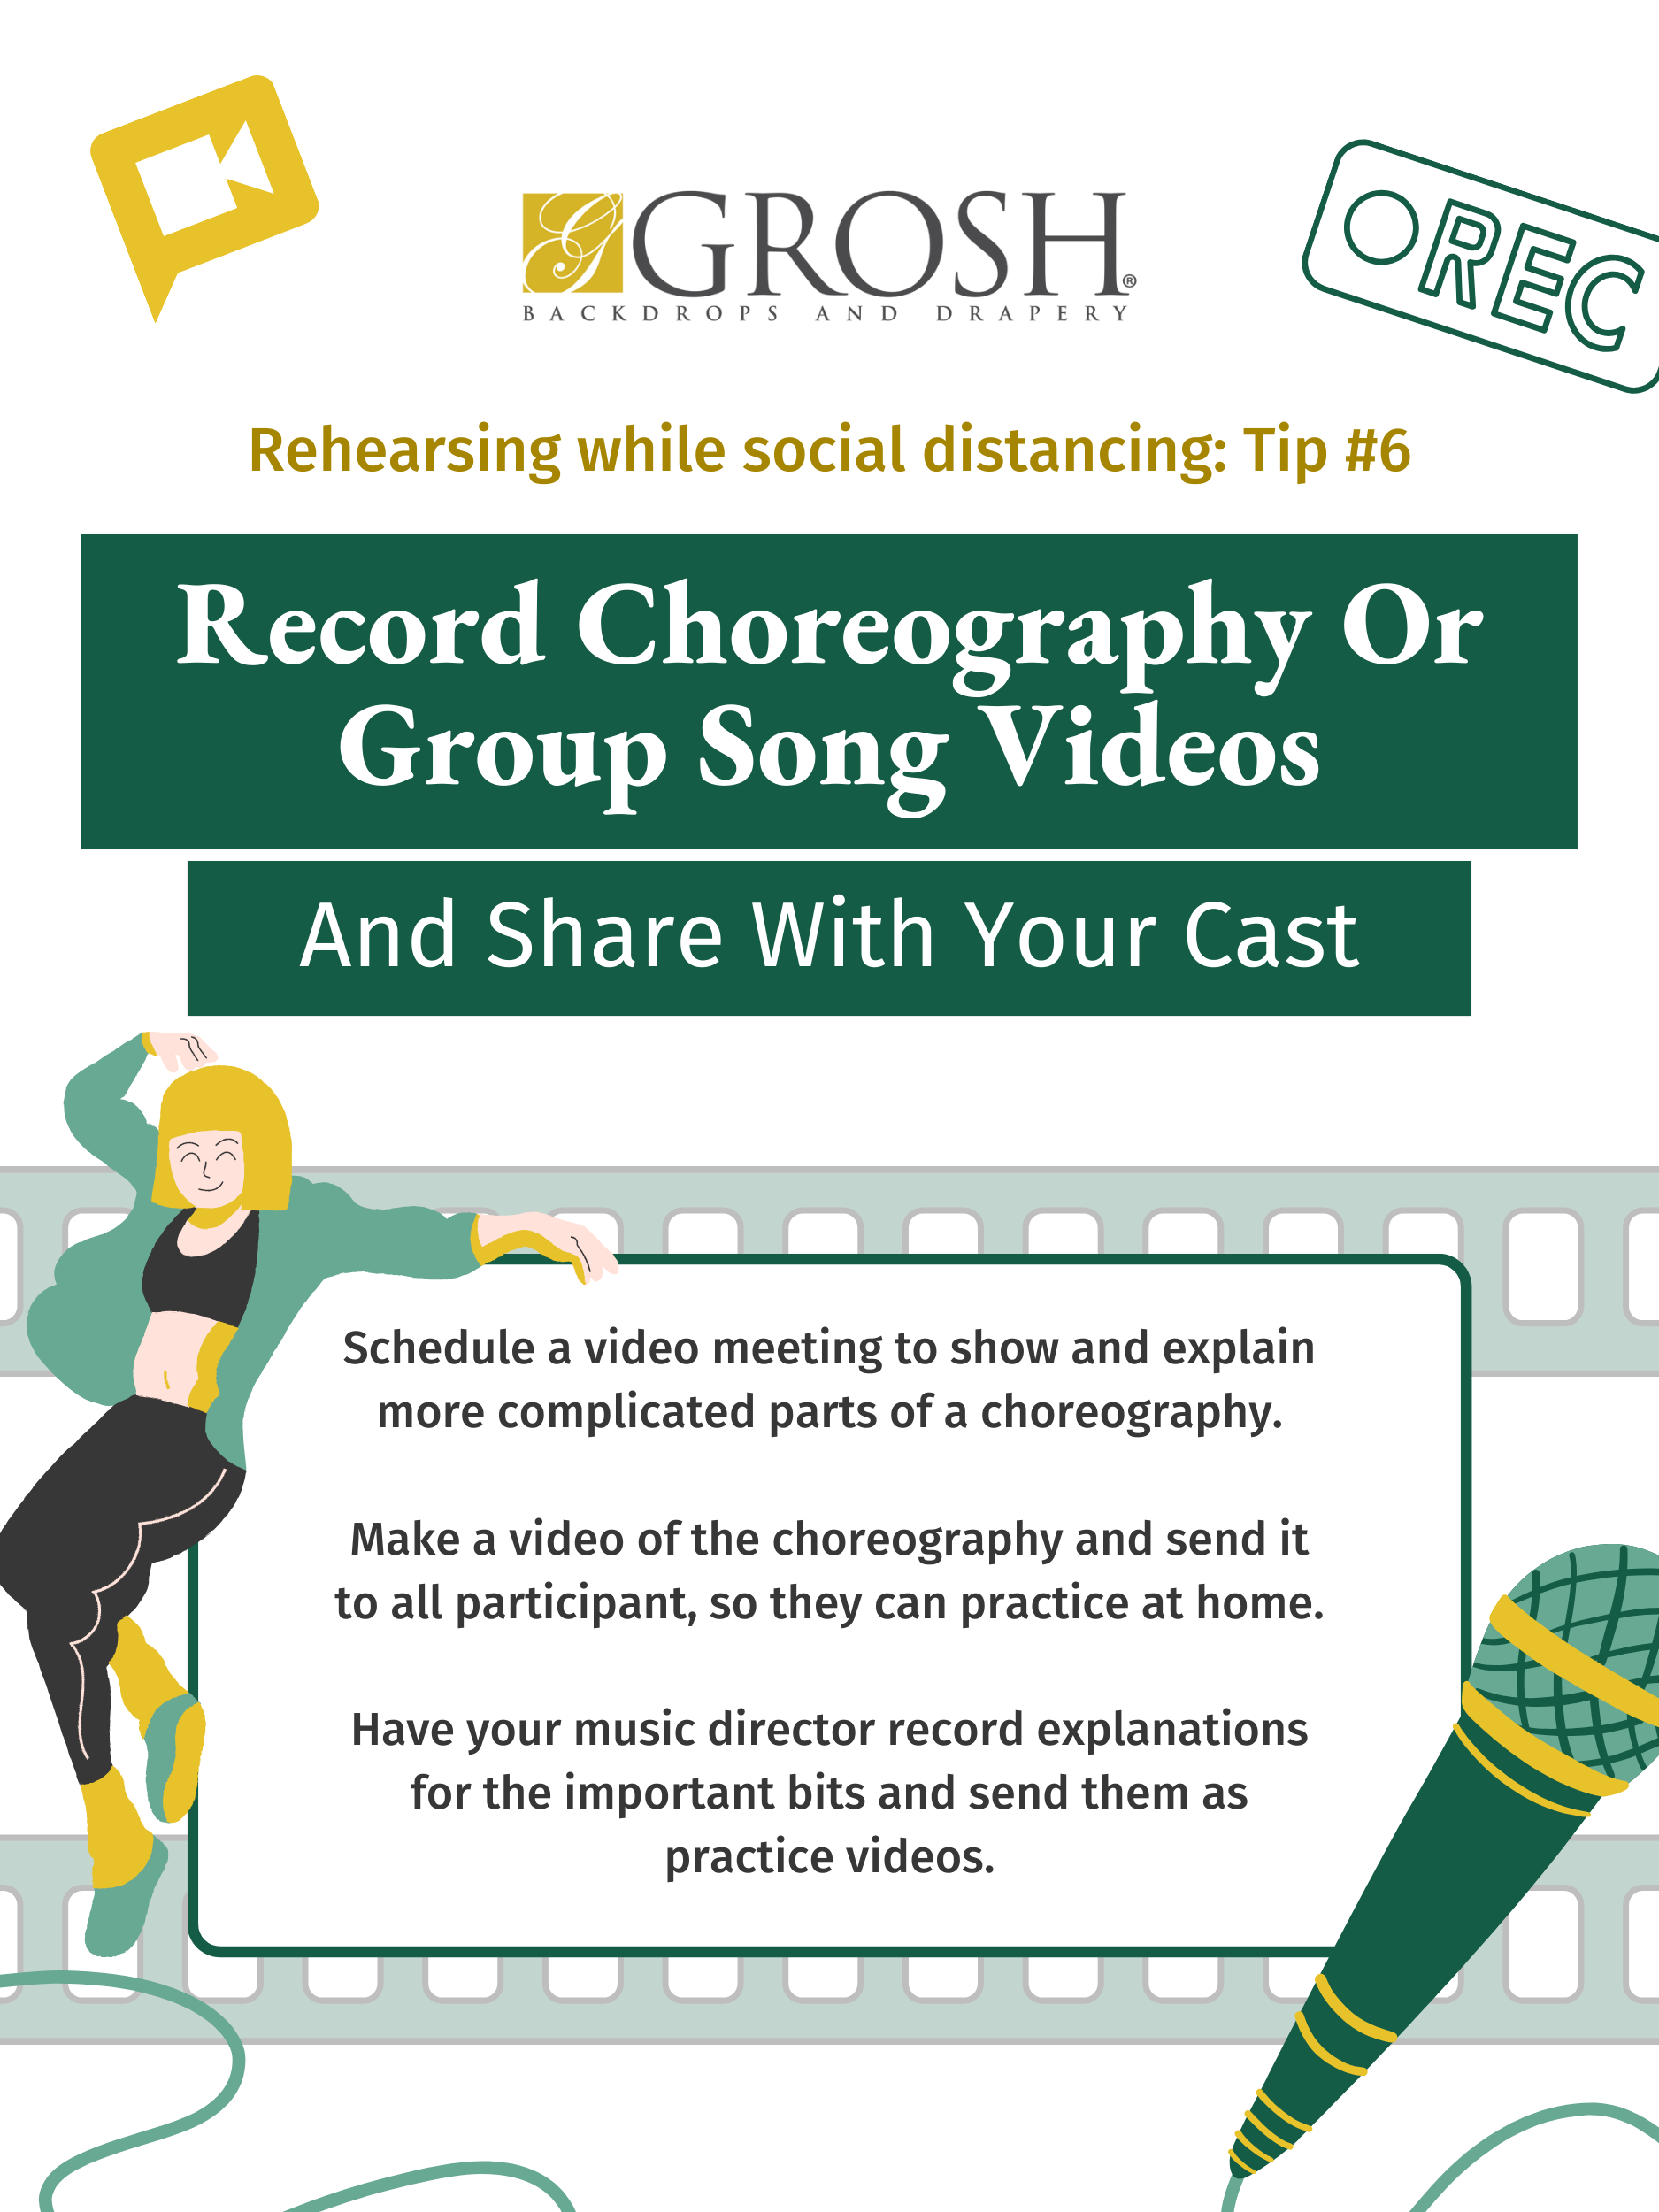 Rehearsing while social distancing Tip 6